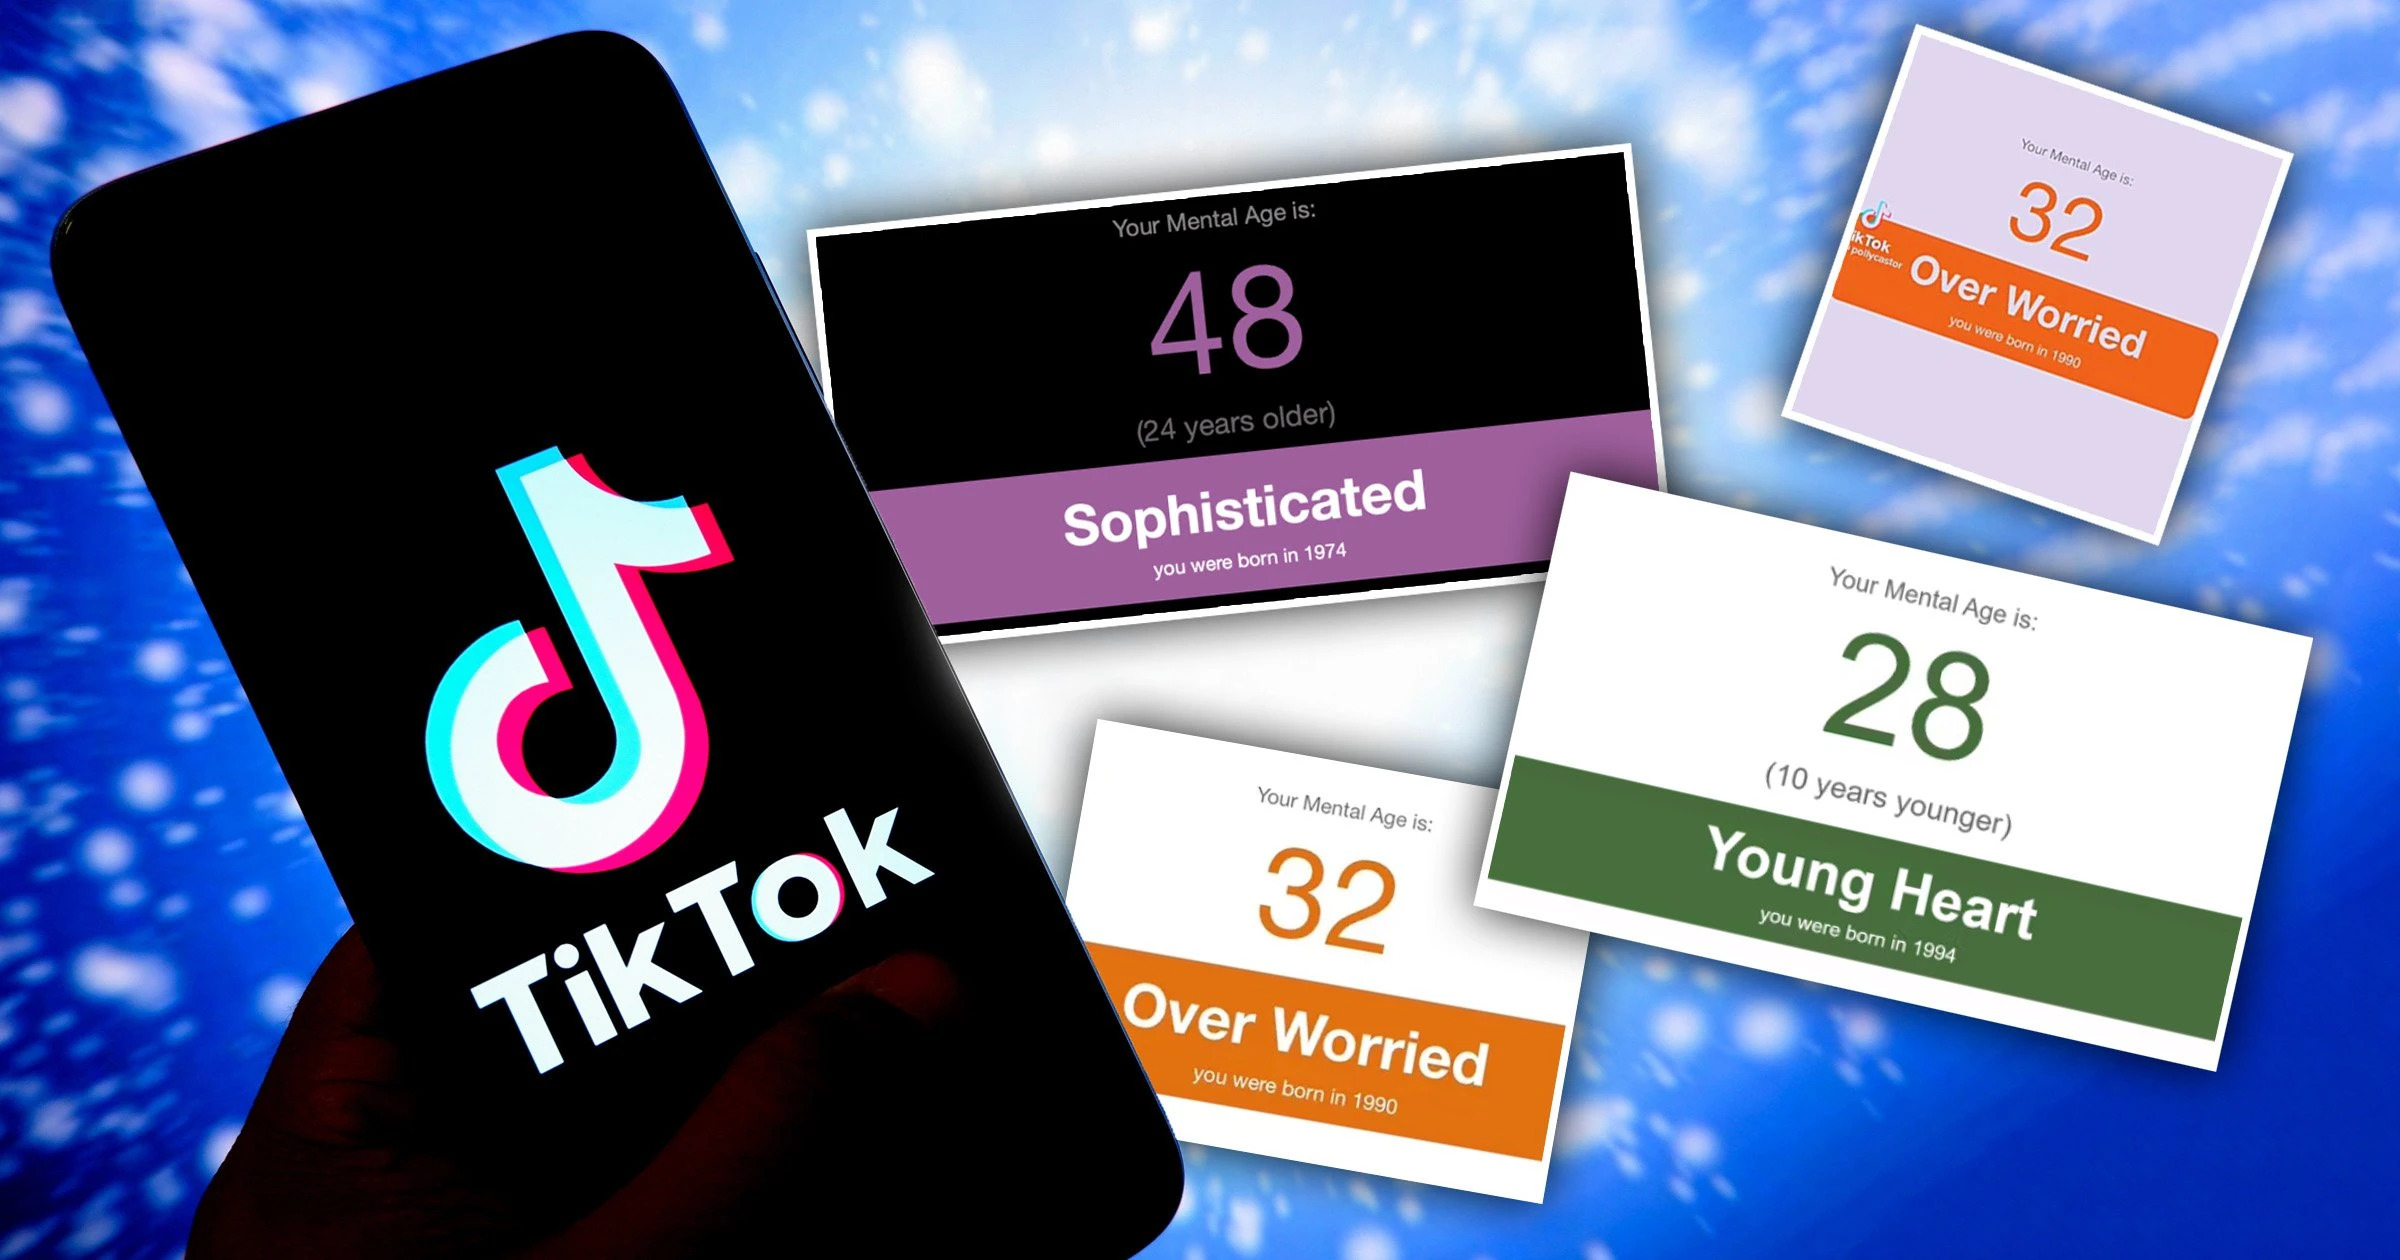 Here’s how to take the TikTok “Mental Age Test” that has gone viral.